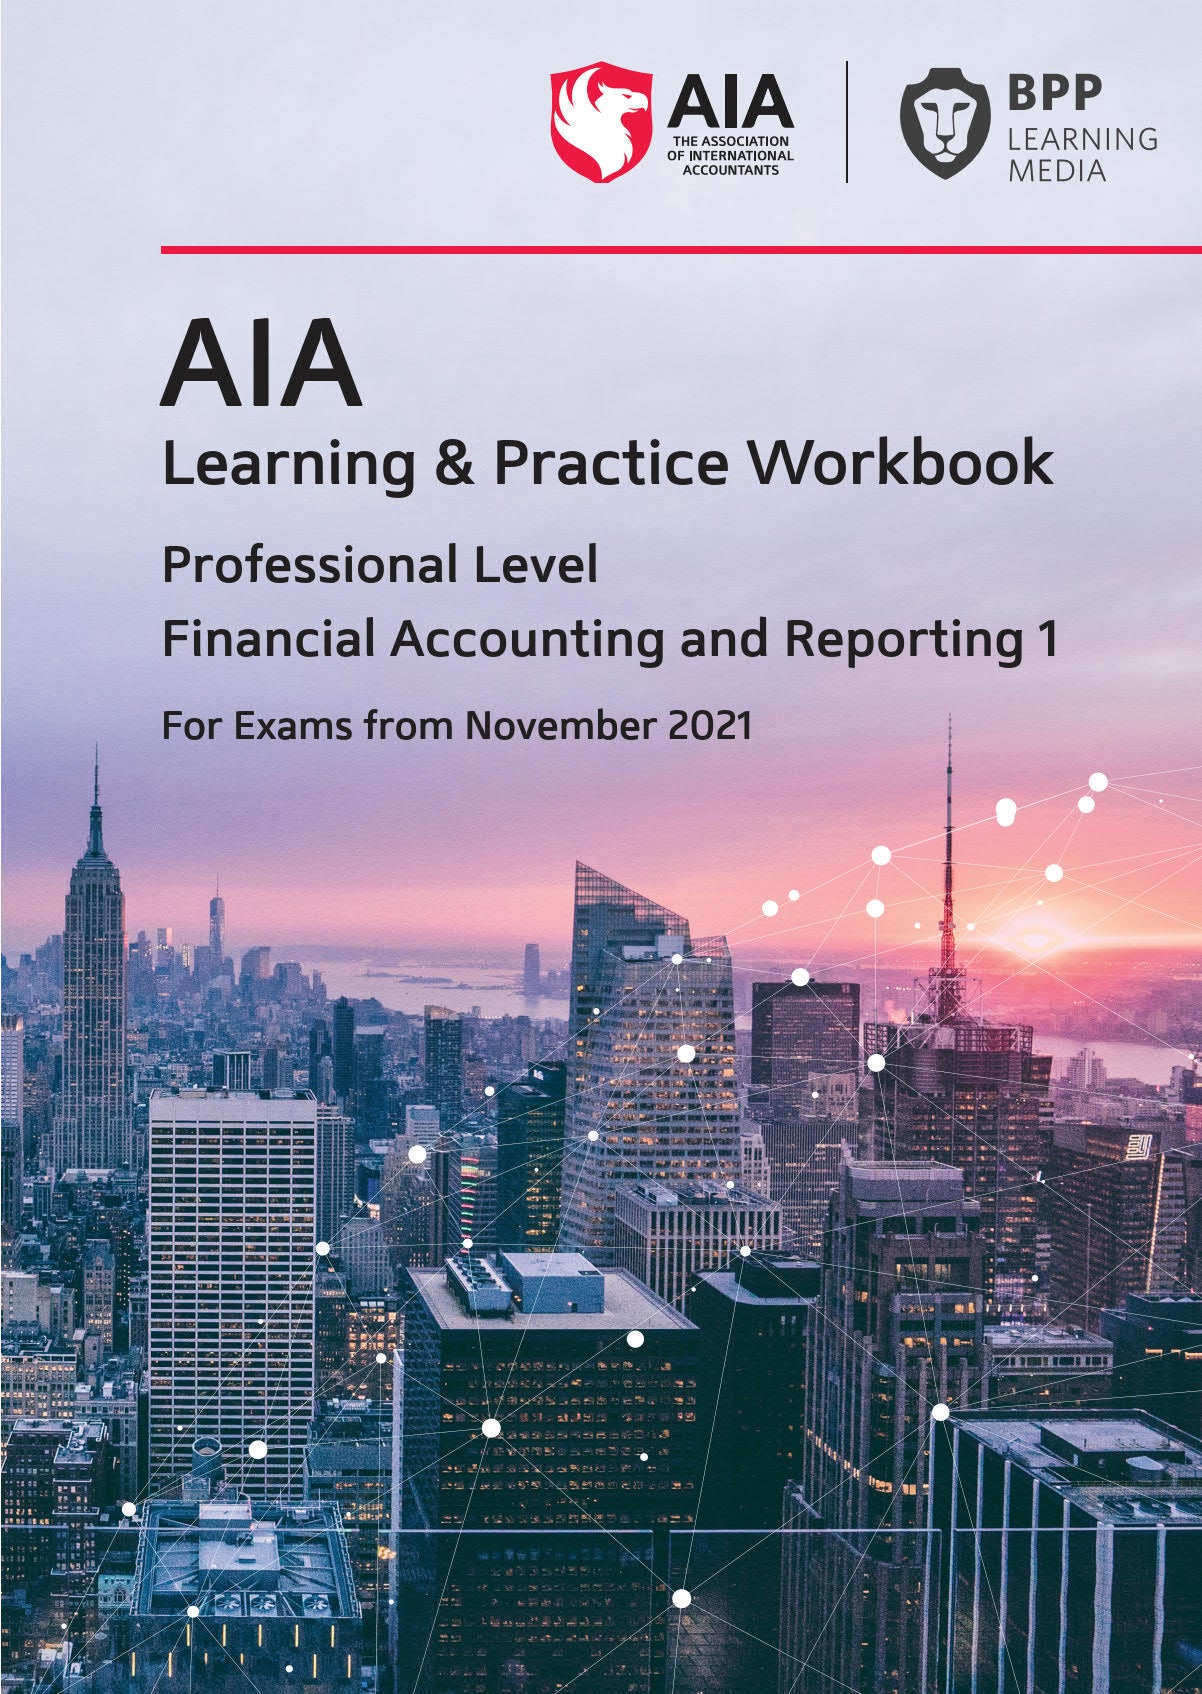 Financial Accounting and Reporting 1